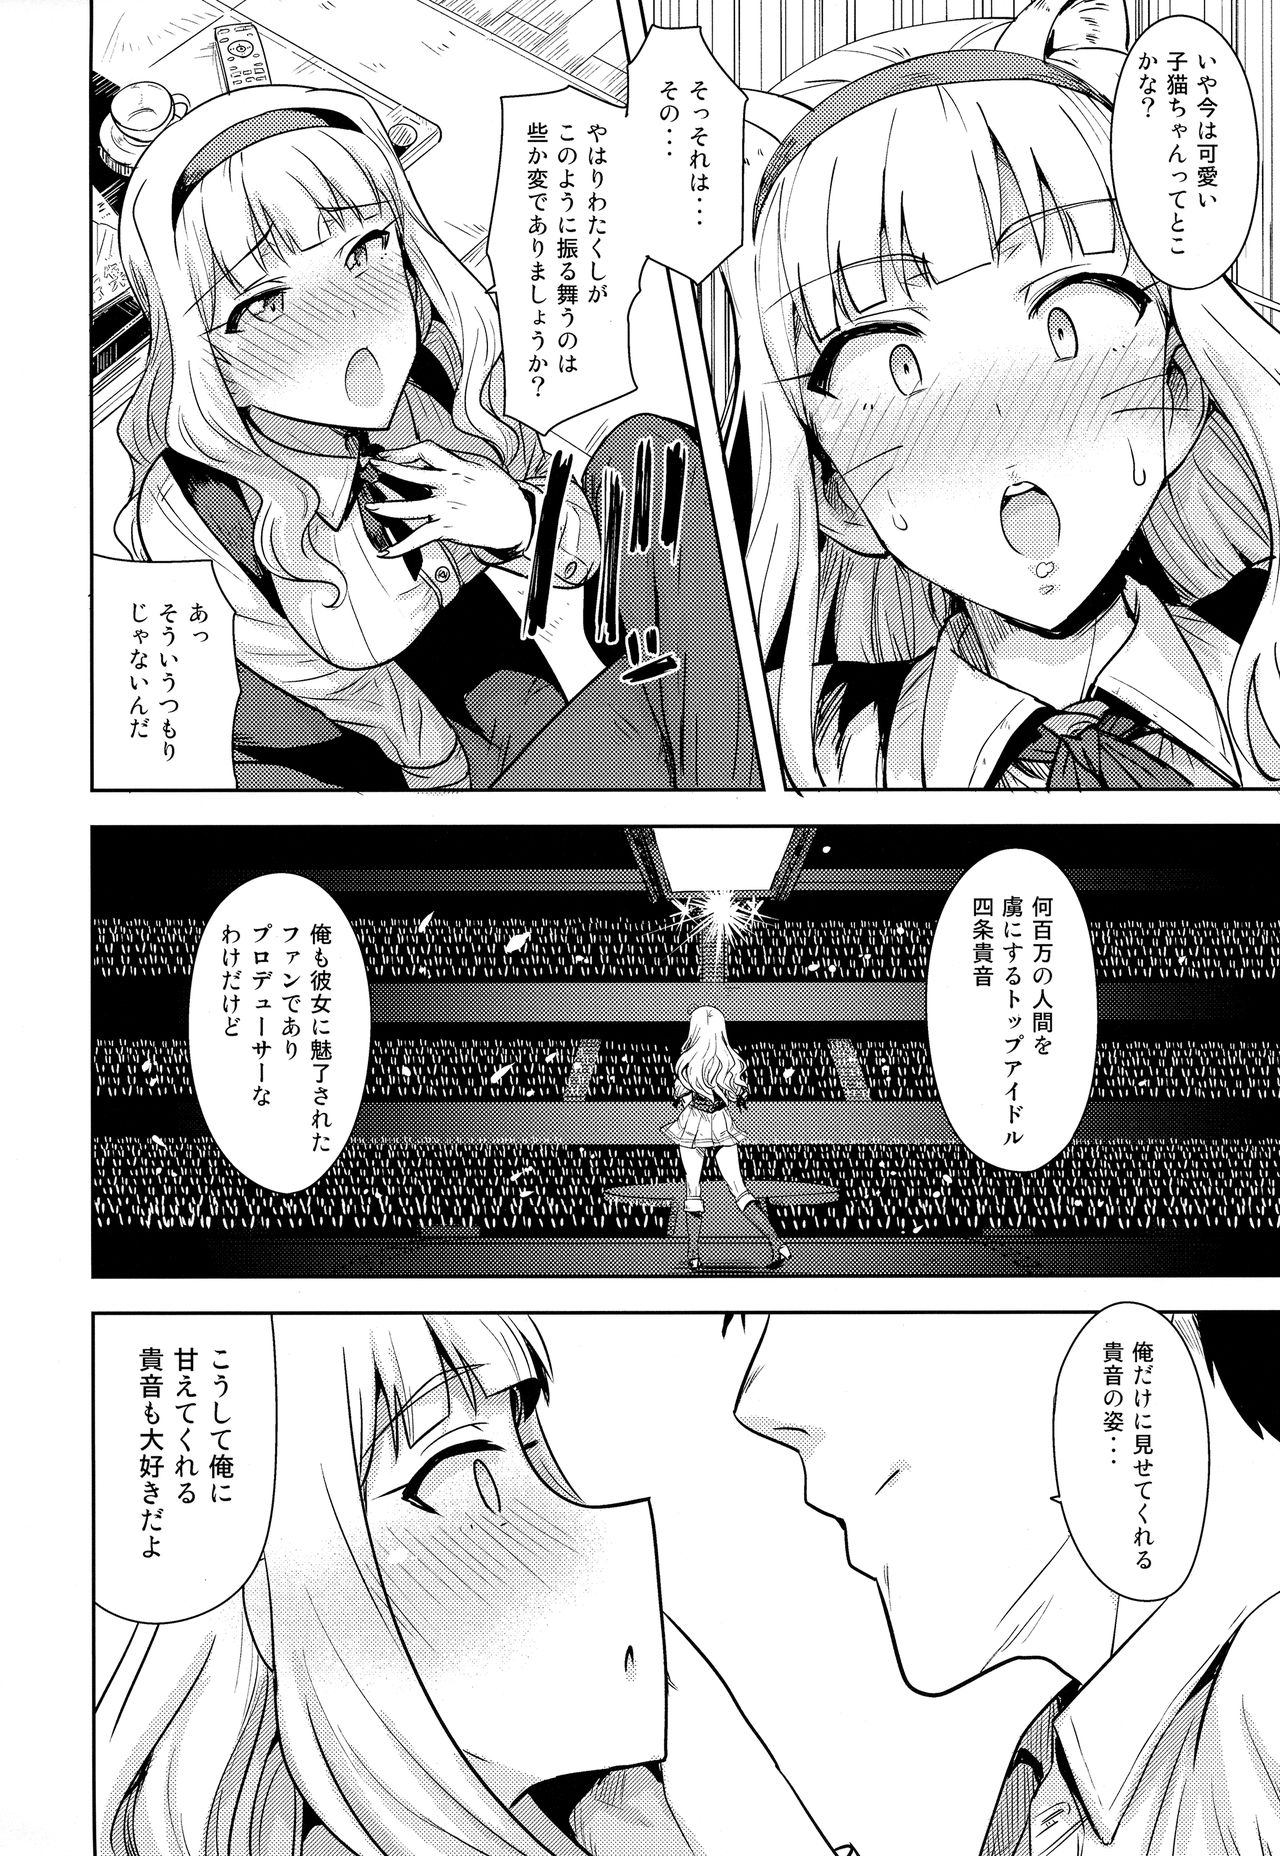 [PLANT (Tsurui)] SWEET MOON 2 (THE IDOLM@STER) page 5 full